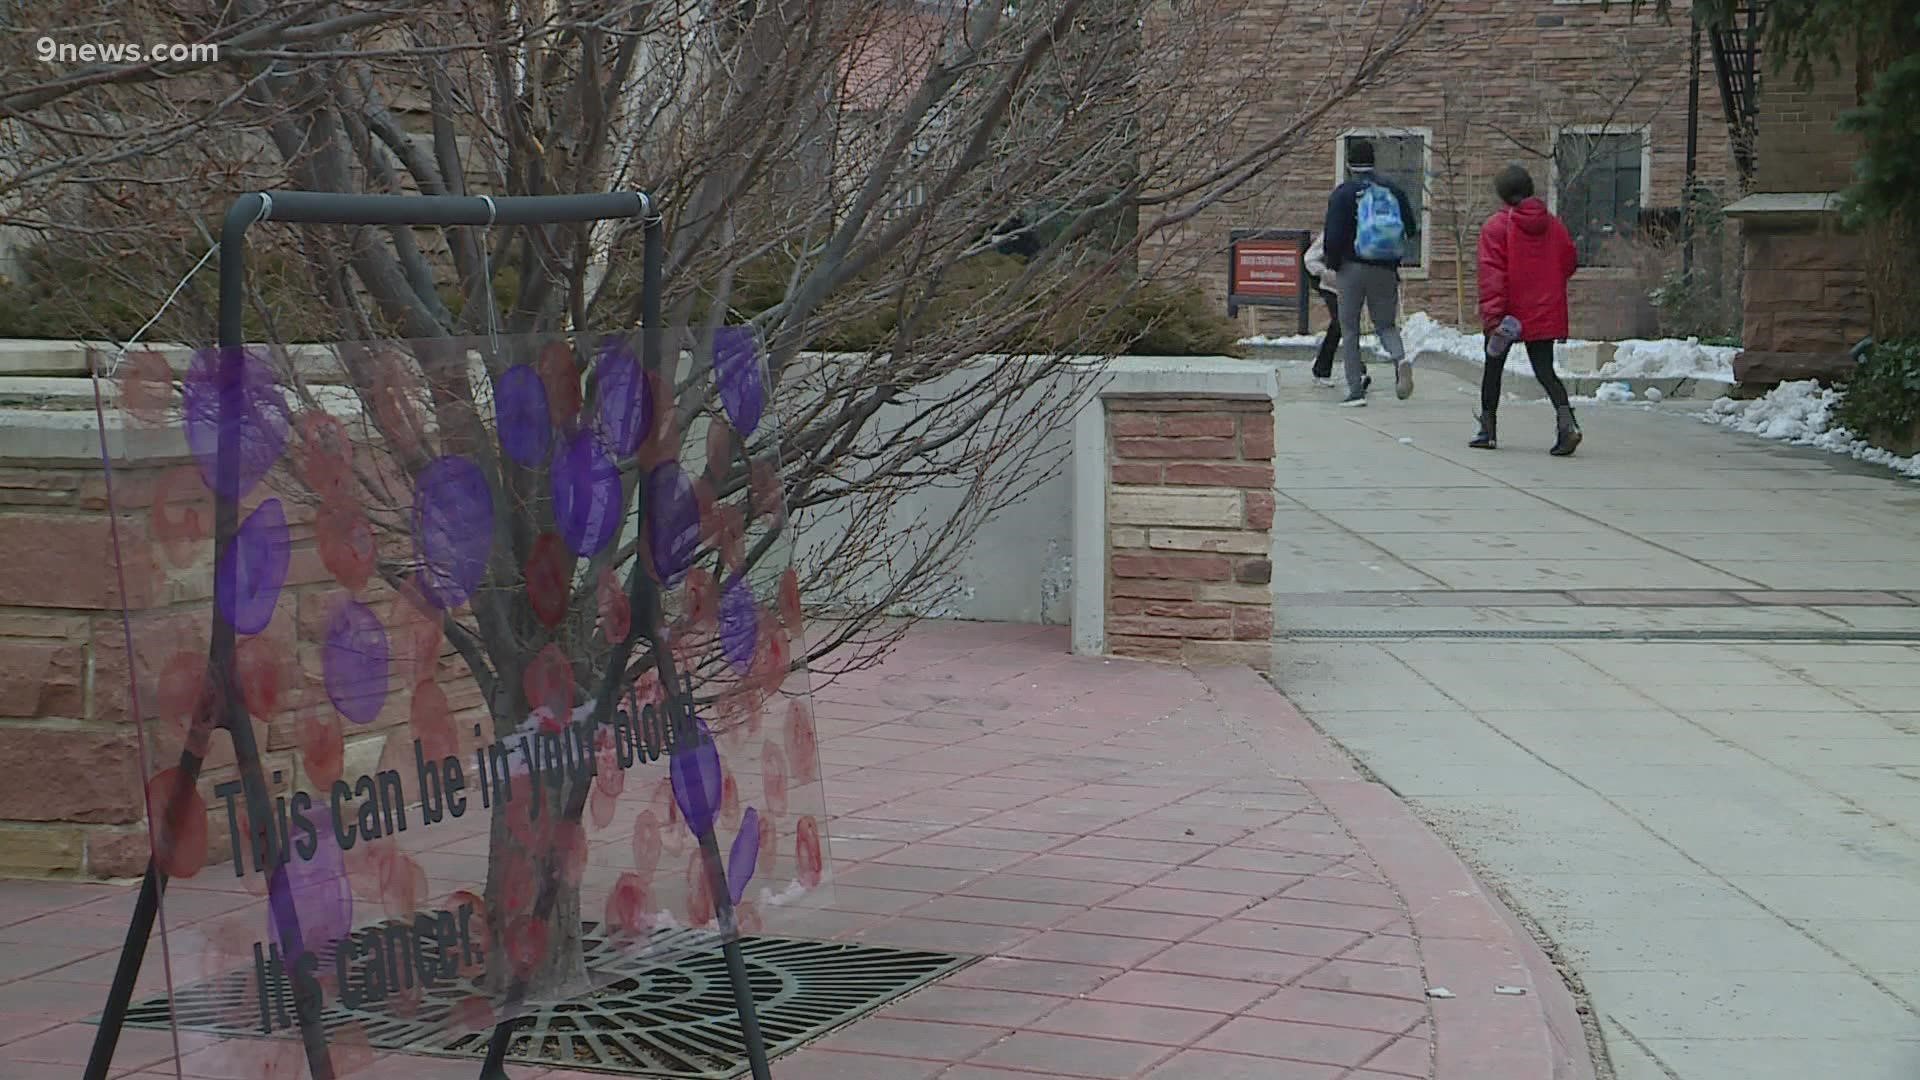 A group of marketing students at CU Boulder created the installation to raise awareness about lymphoma, a blood cancer now more common among young adults.